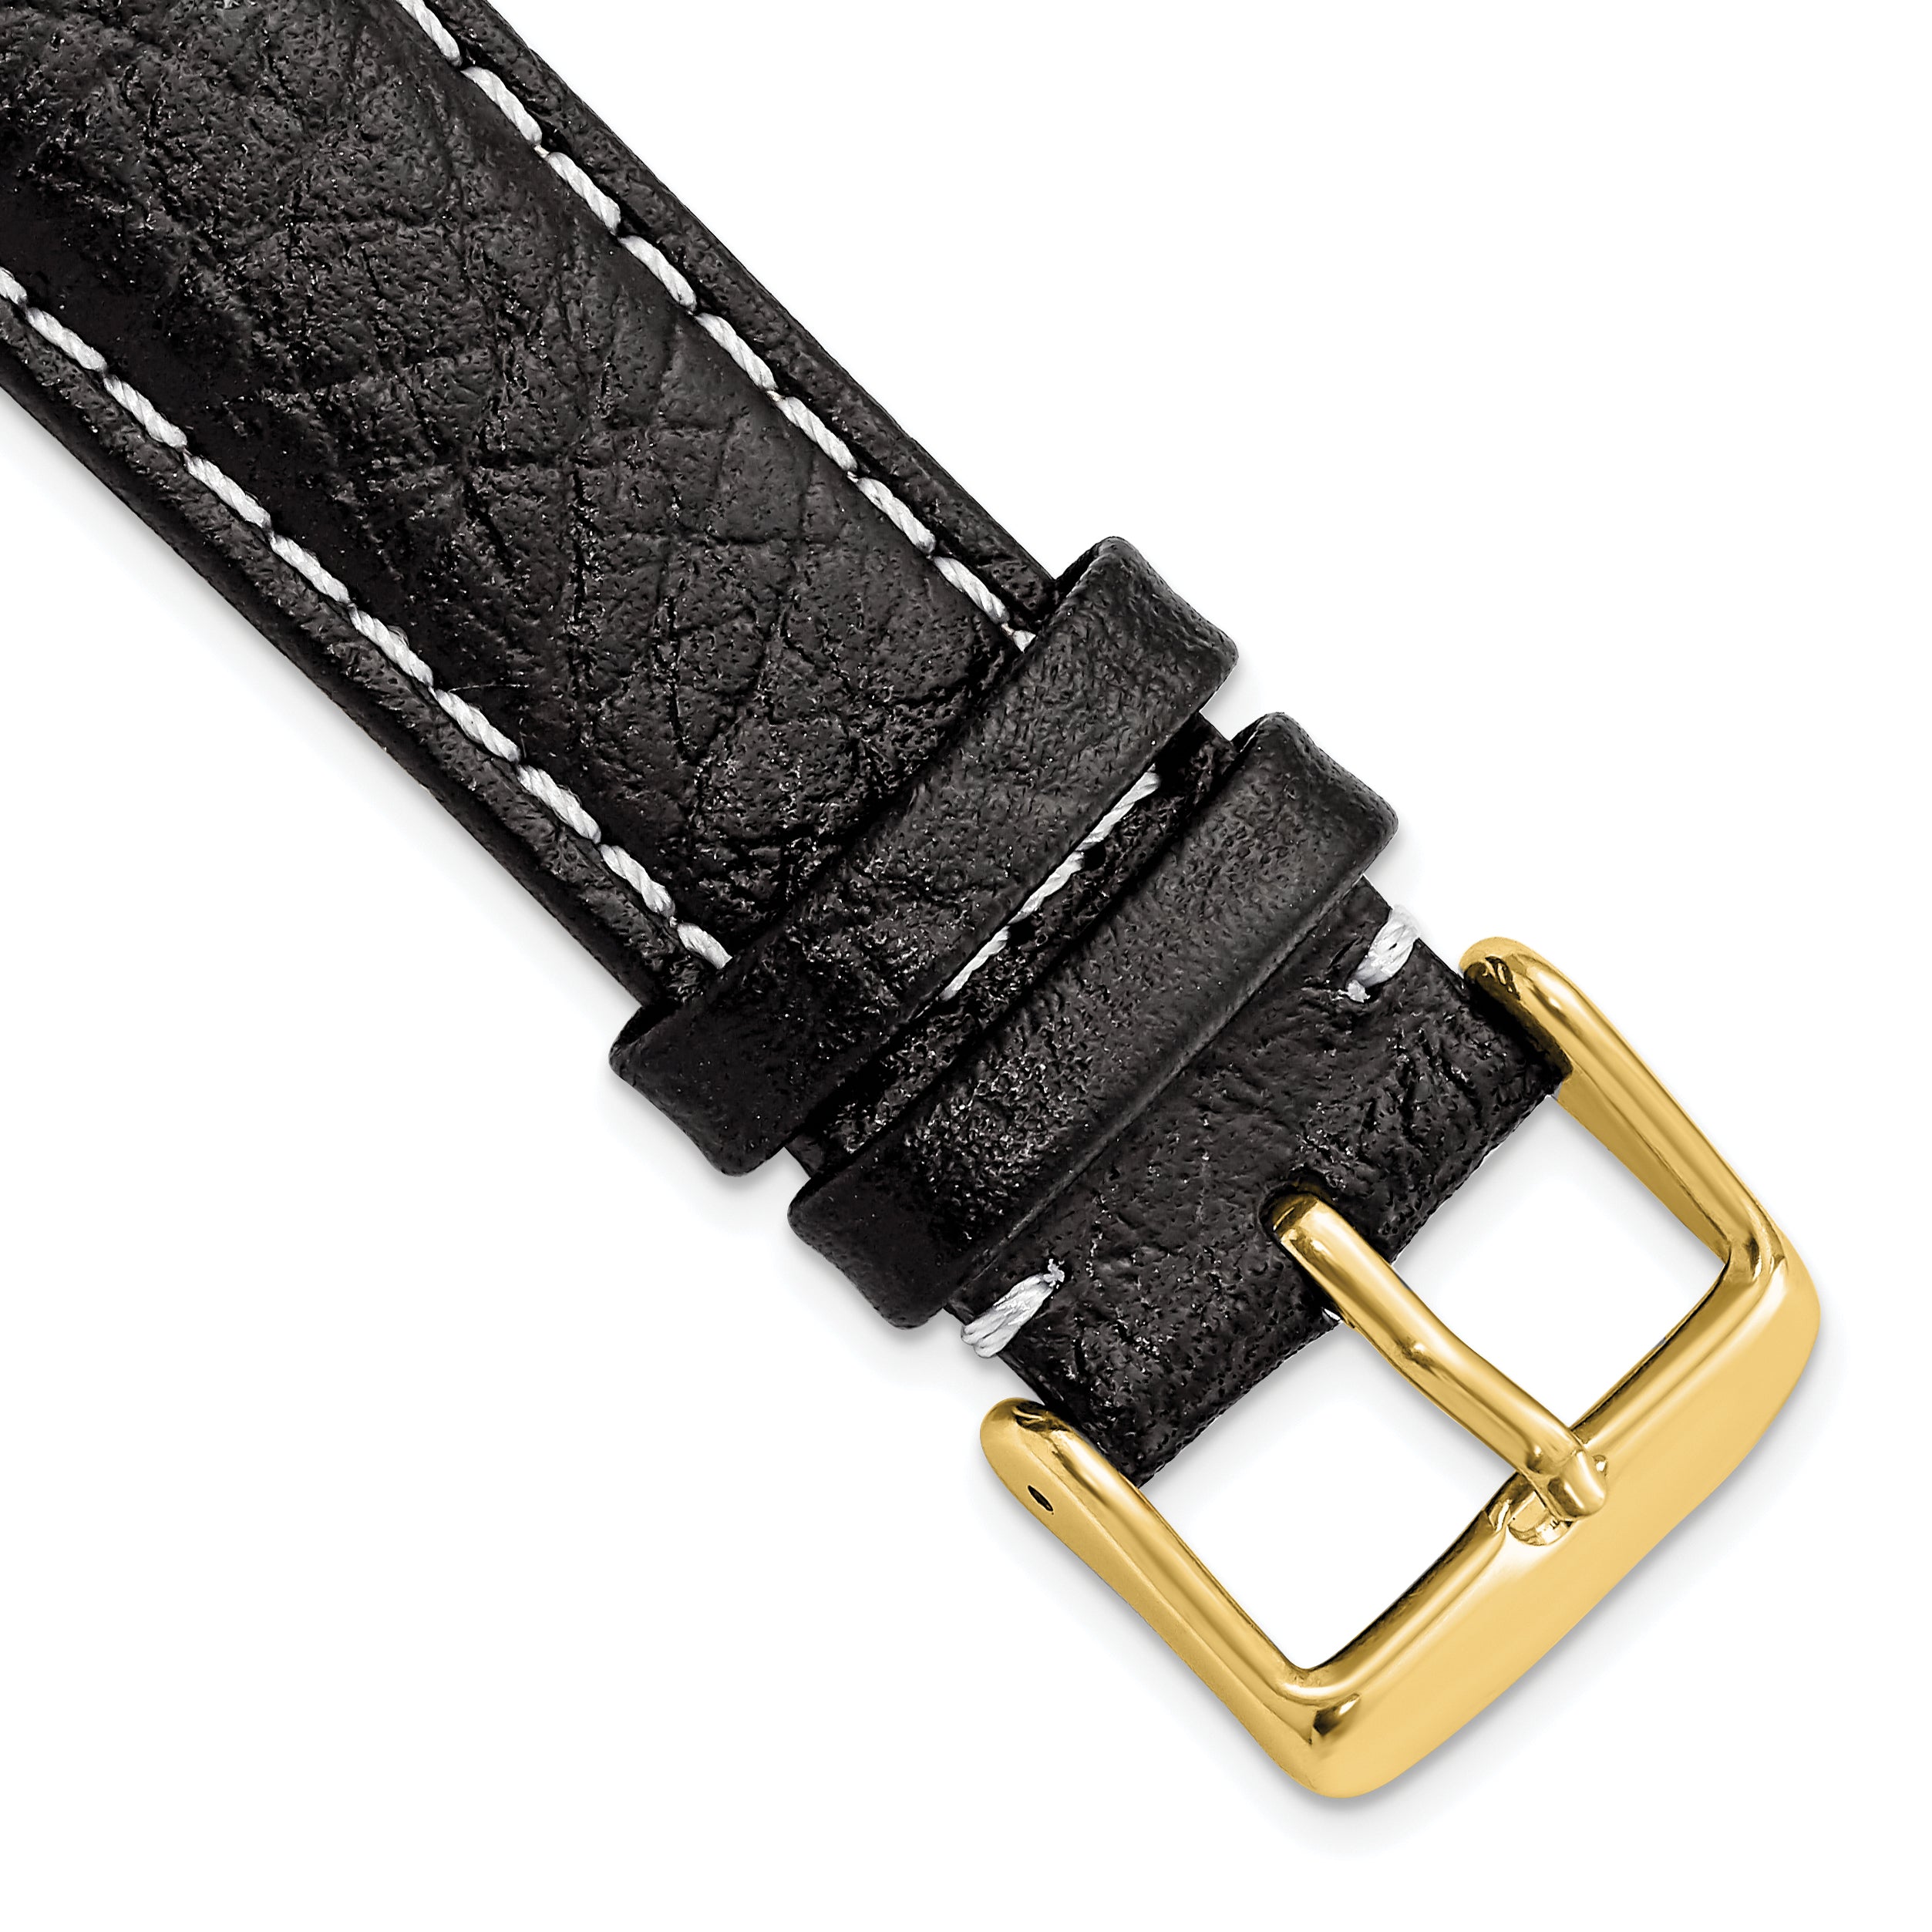 DeBeer 20mm Black Sport Leather with White Stitching and Gold-tone Buckle 7.5 inch Watch Band